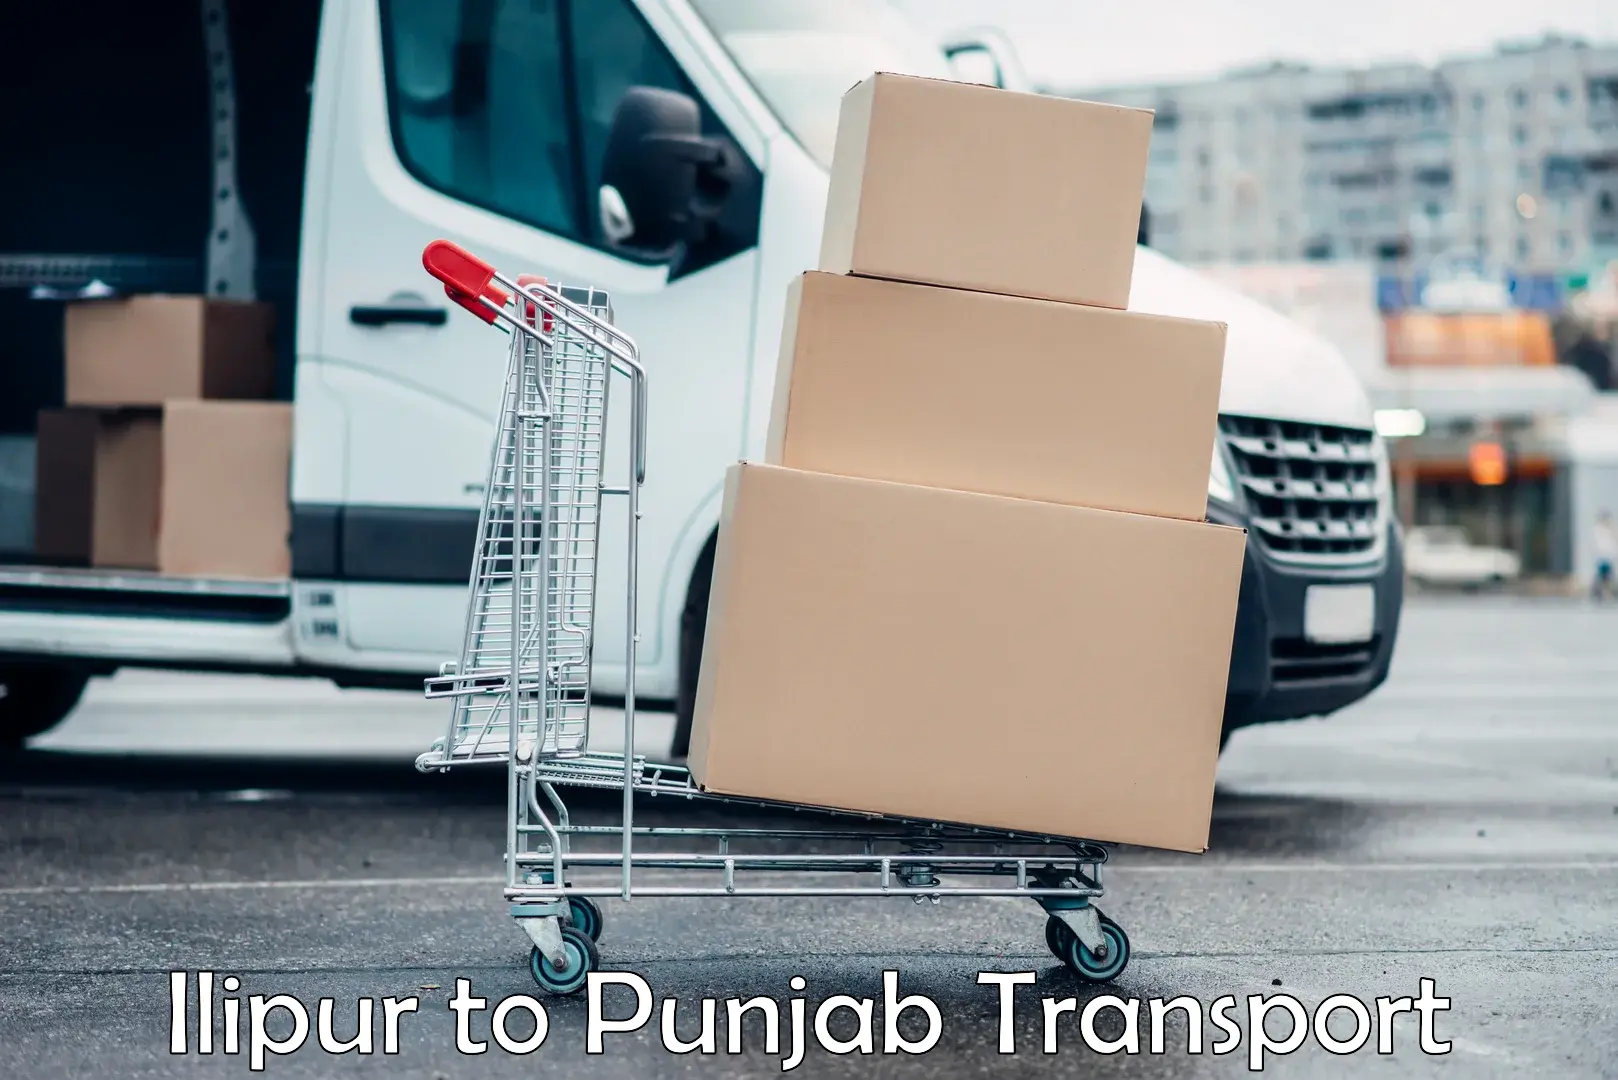 Luggage transport services Ilipur to Firozpur